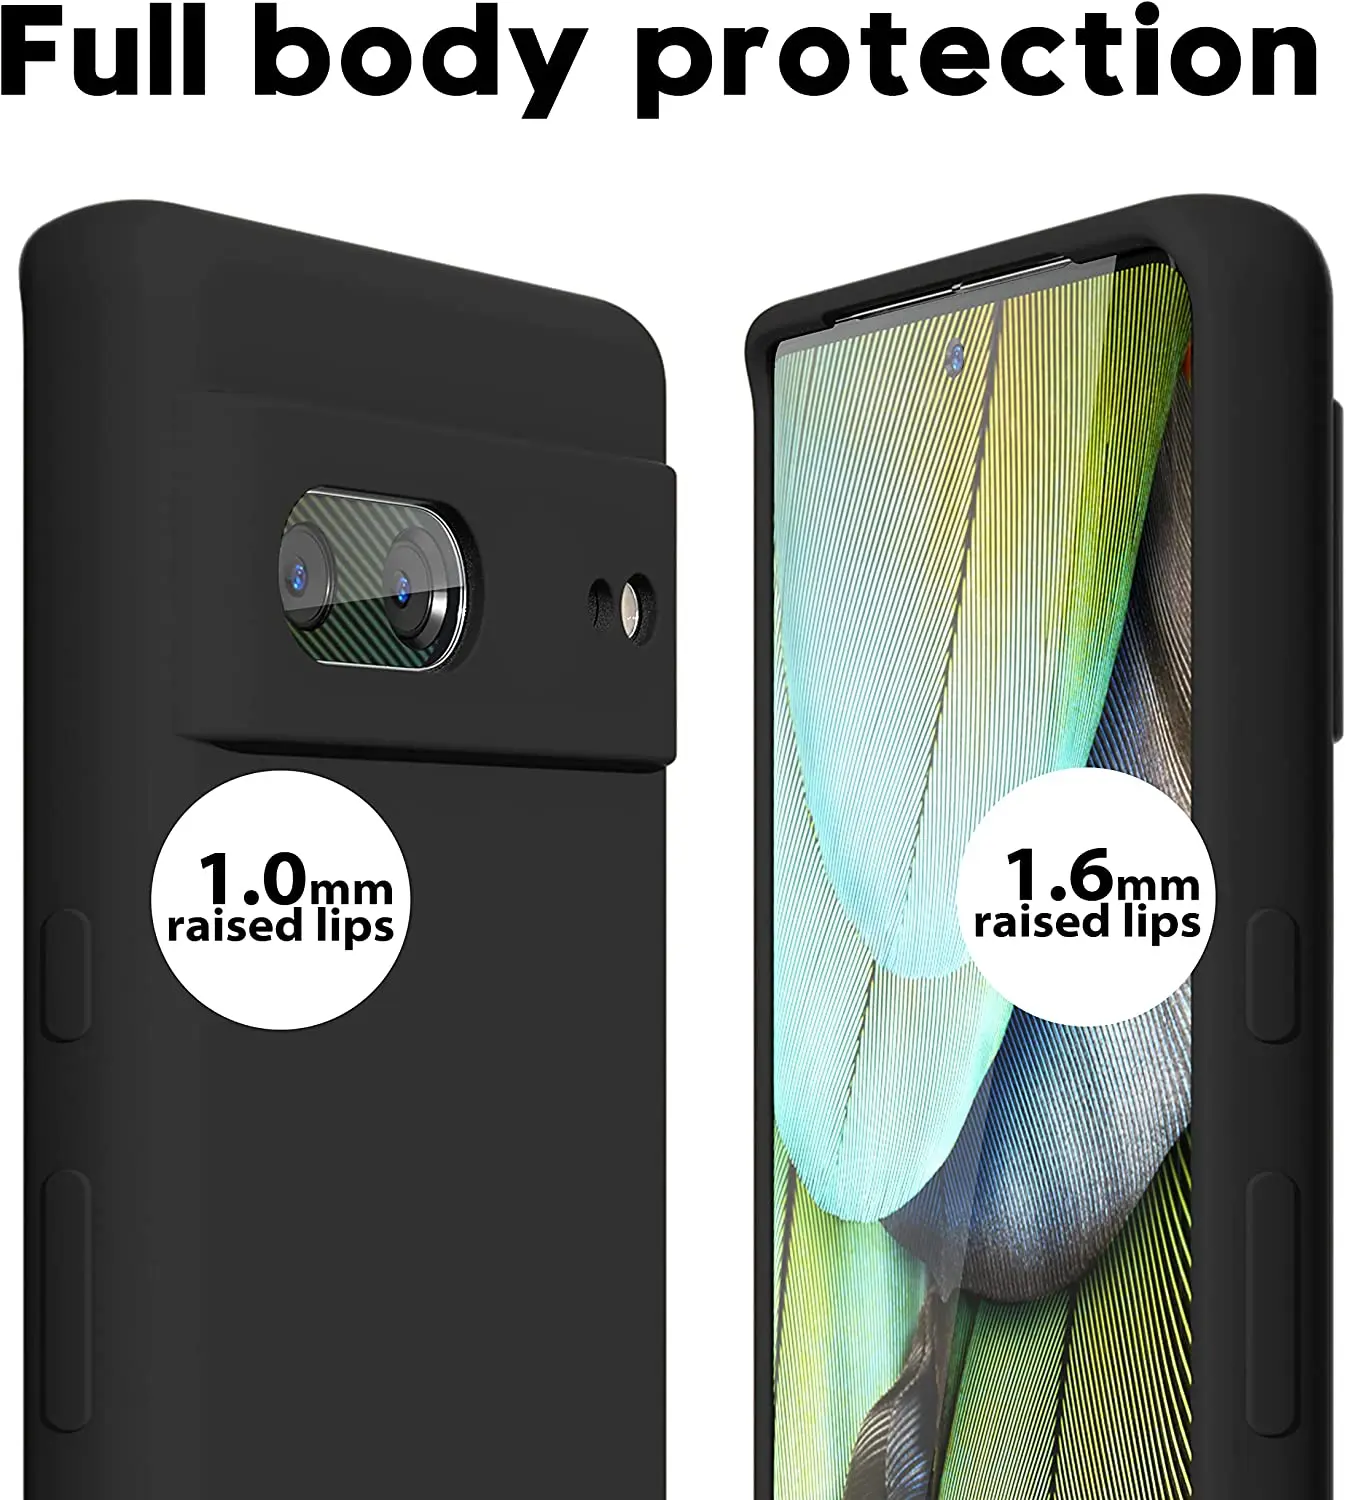 1.0mm and 1.6mm raised lips and Full body protection 